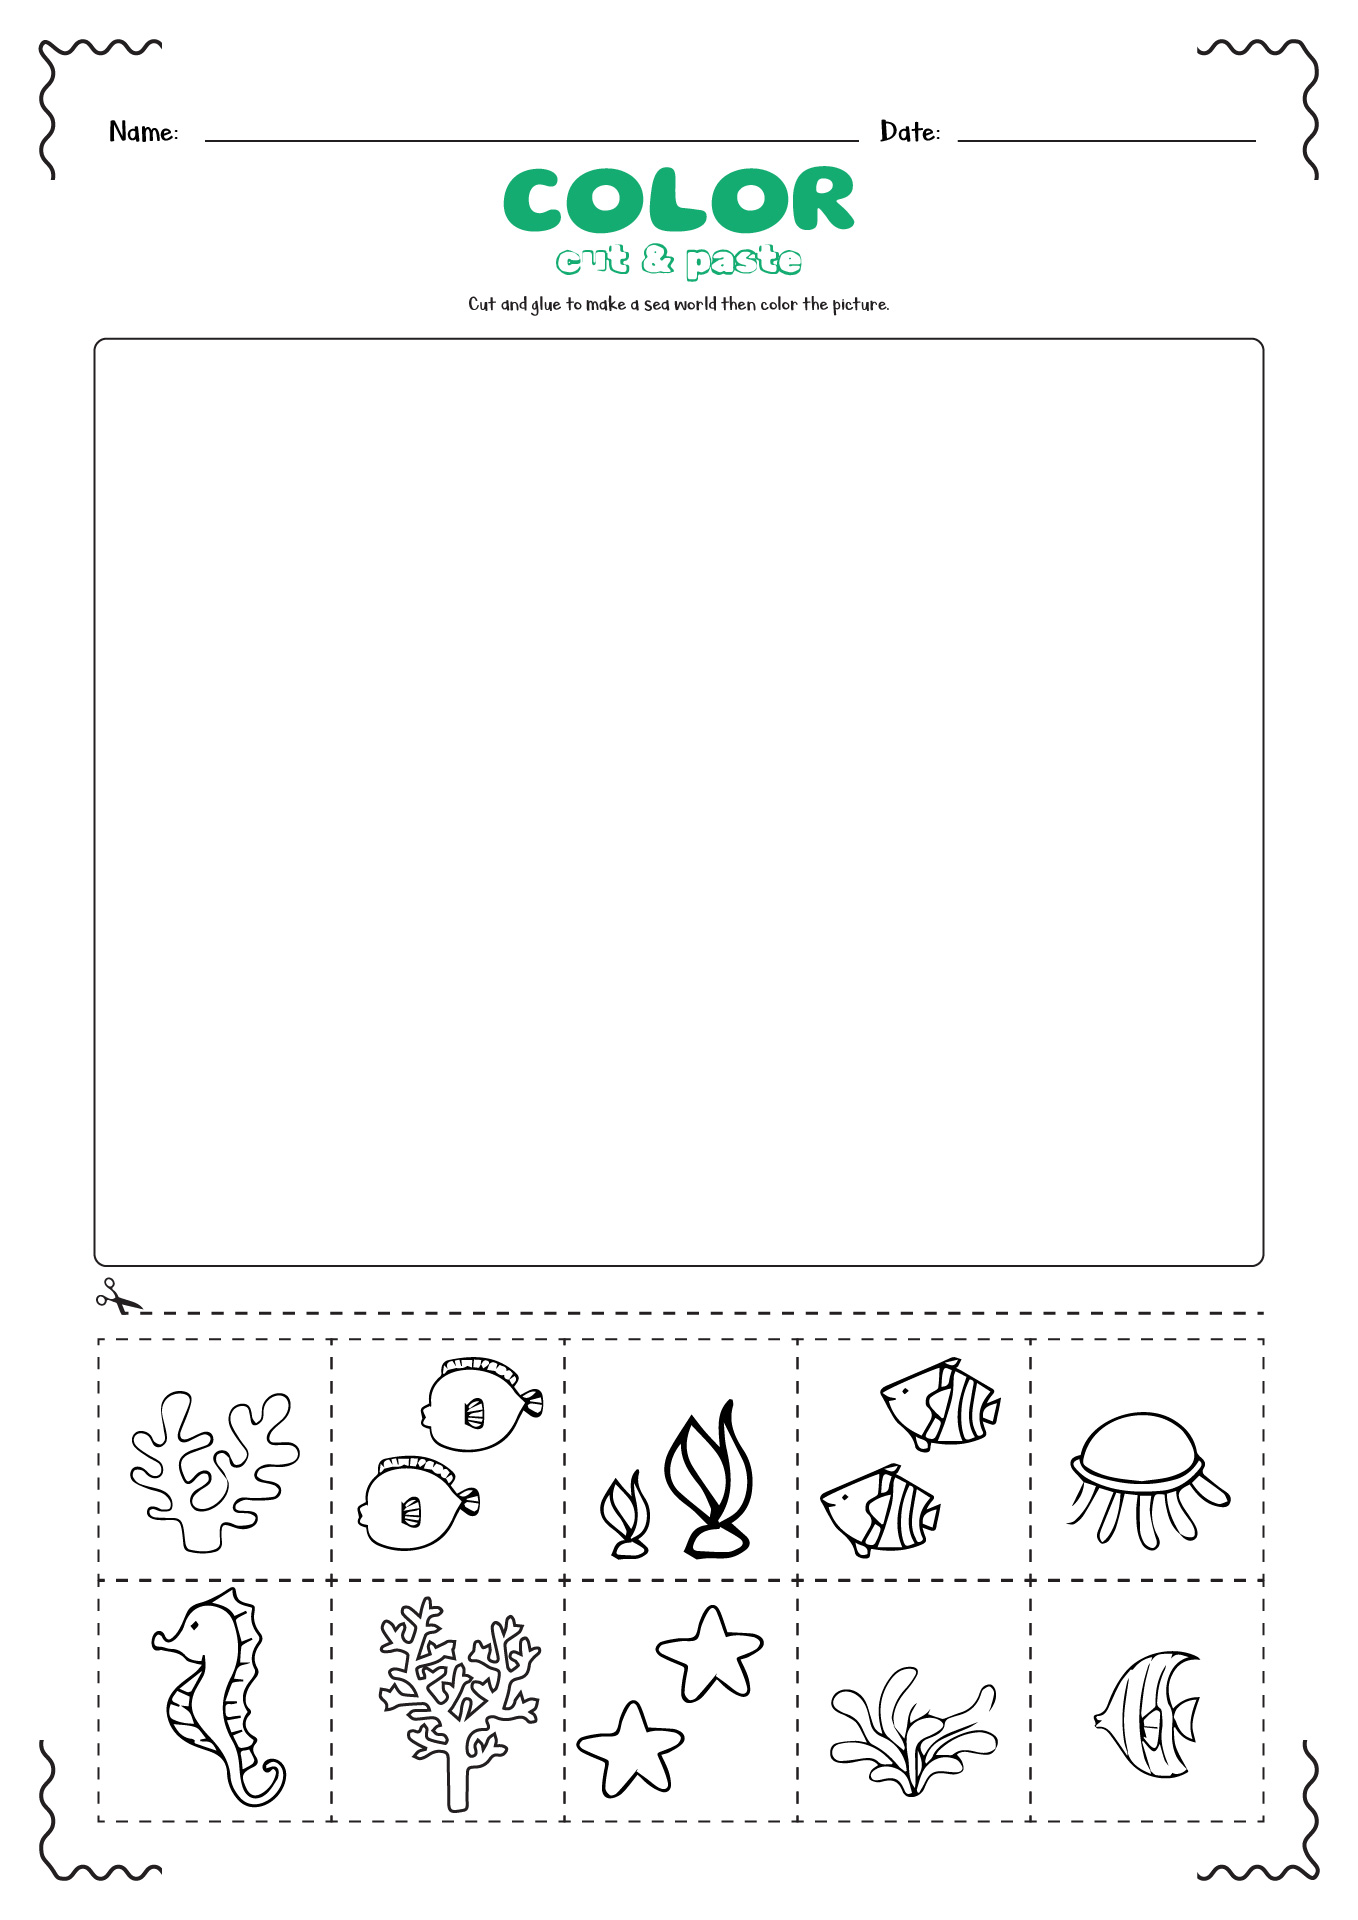 Color Cut and Paste Worksheets